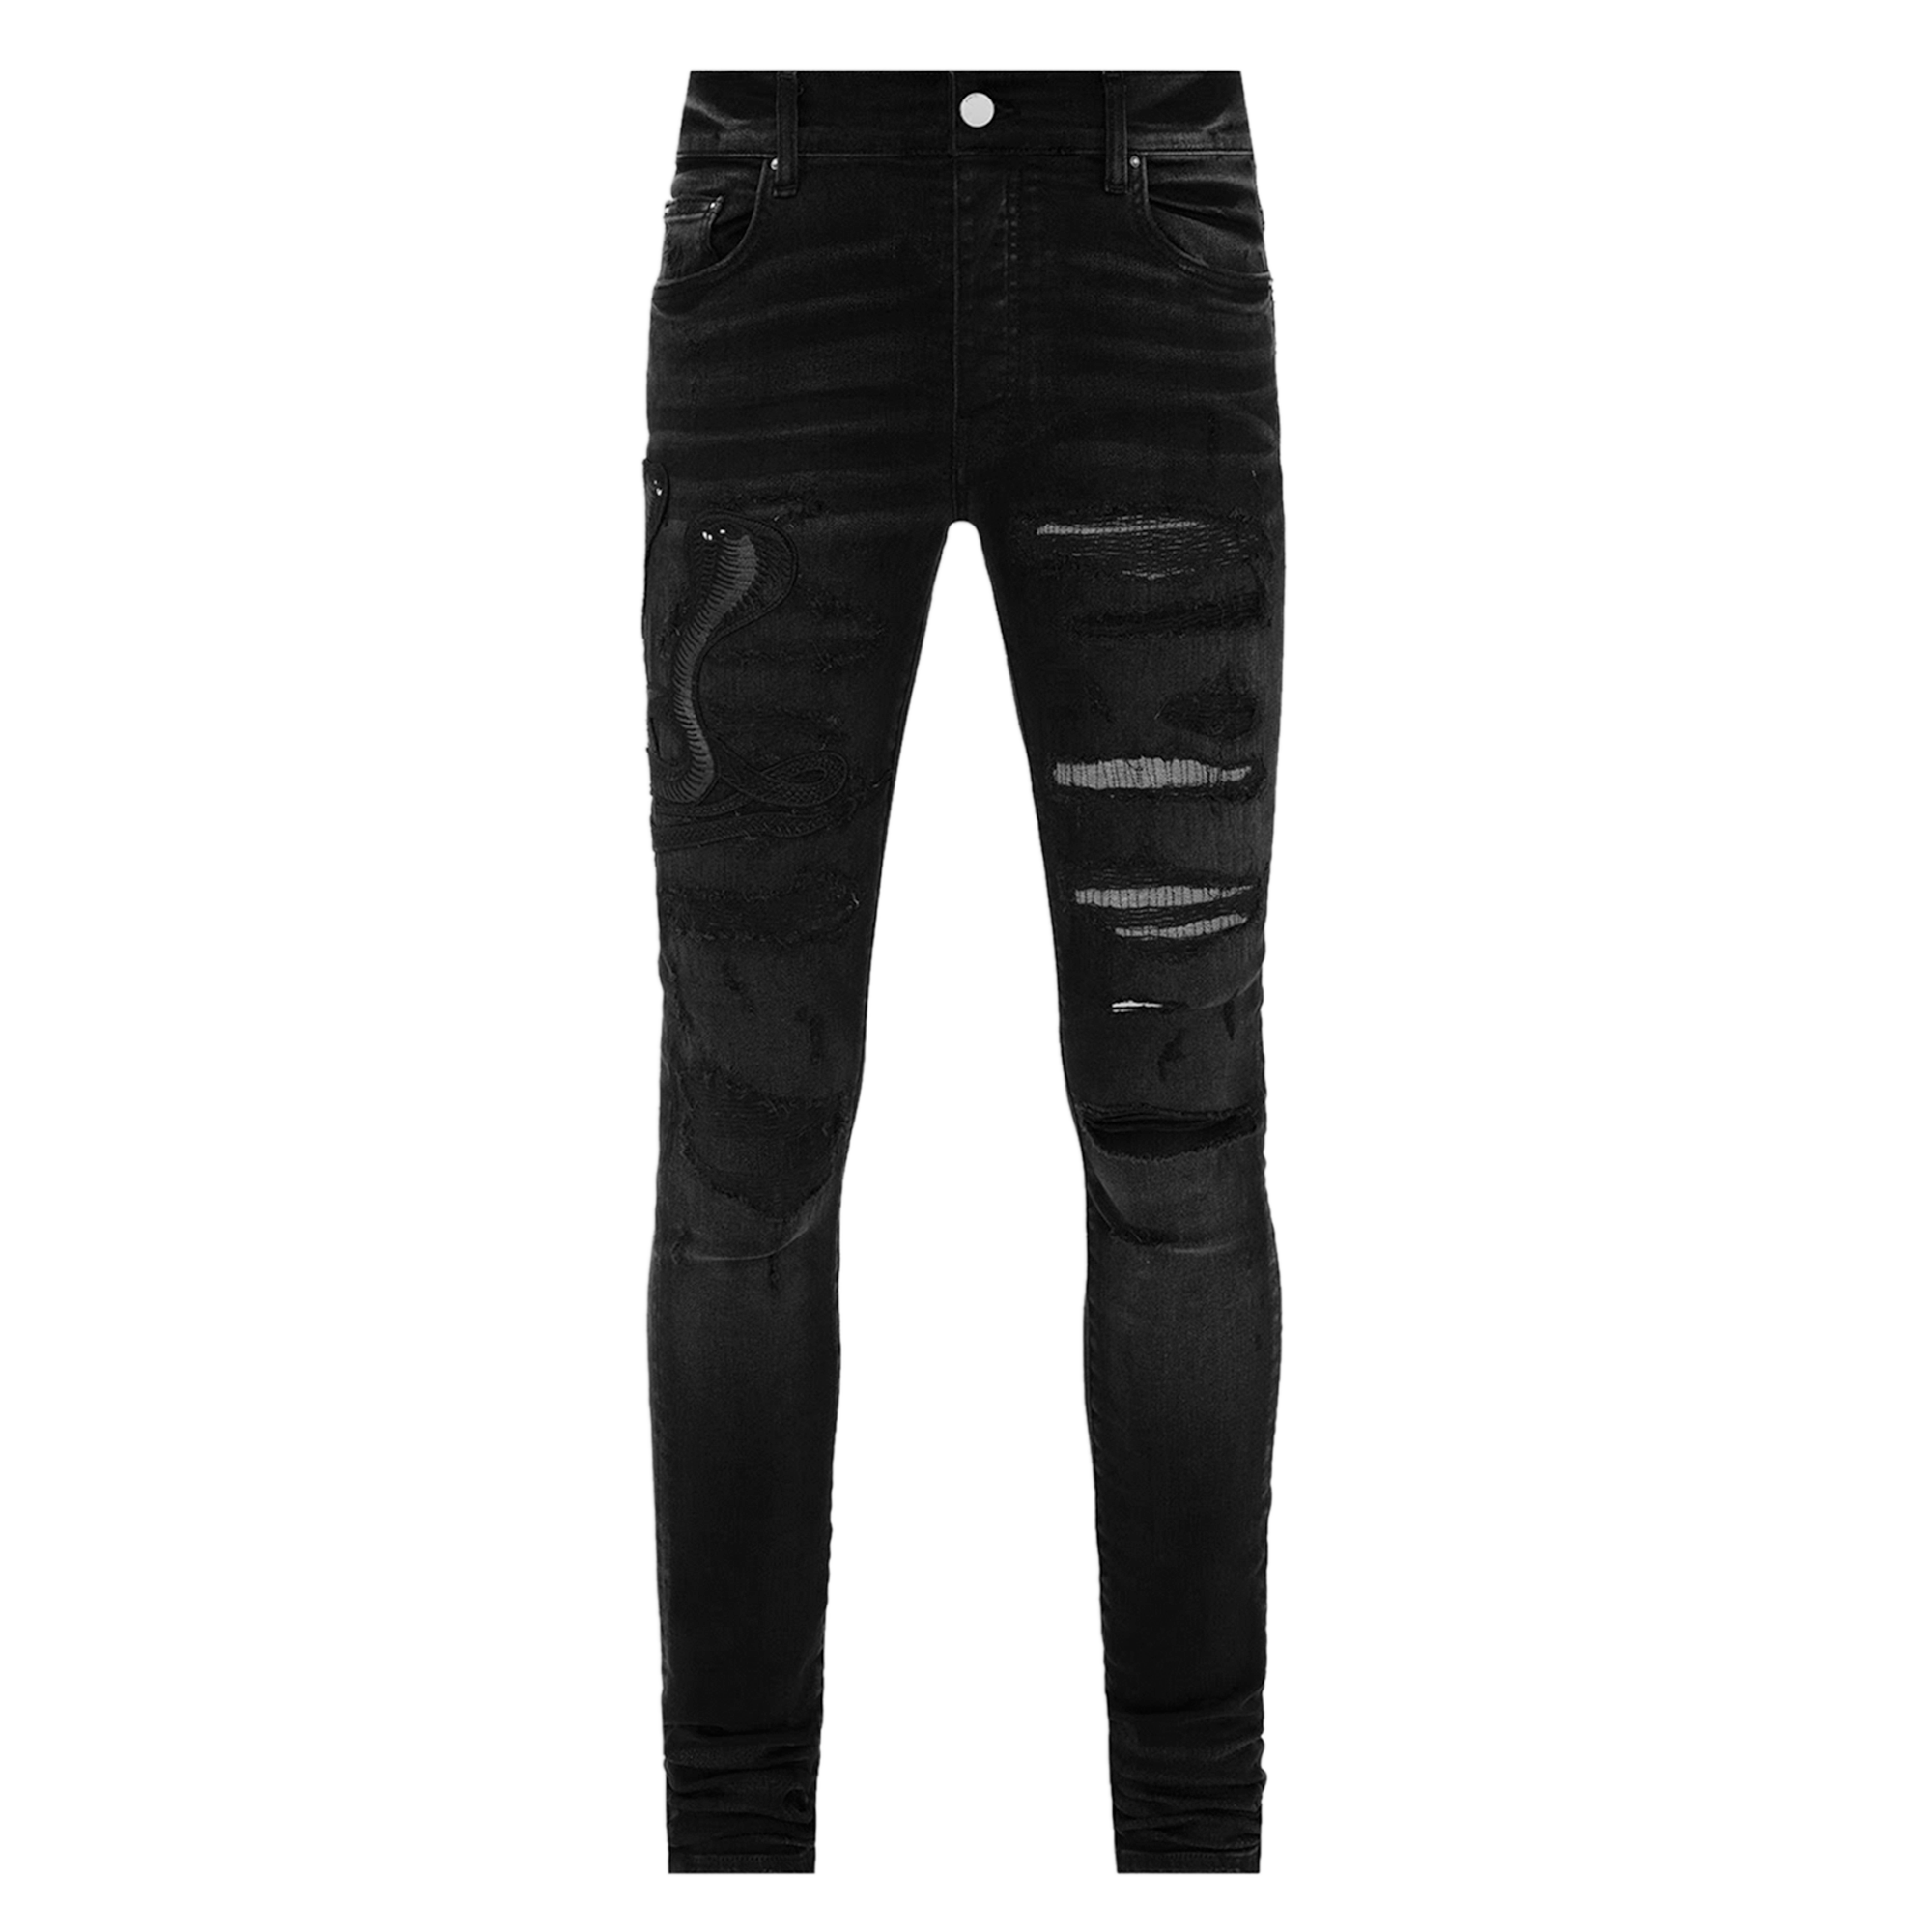 Aged Black Archive Snake Jeans - Mike Clothes